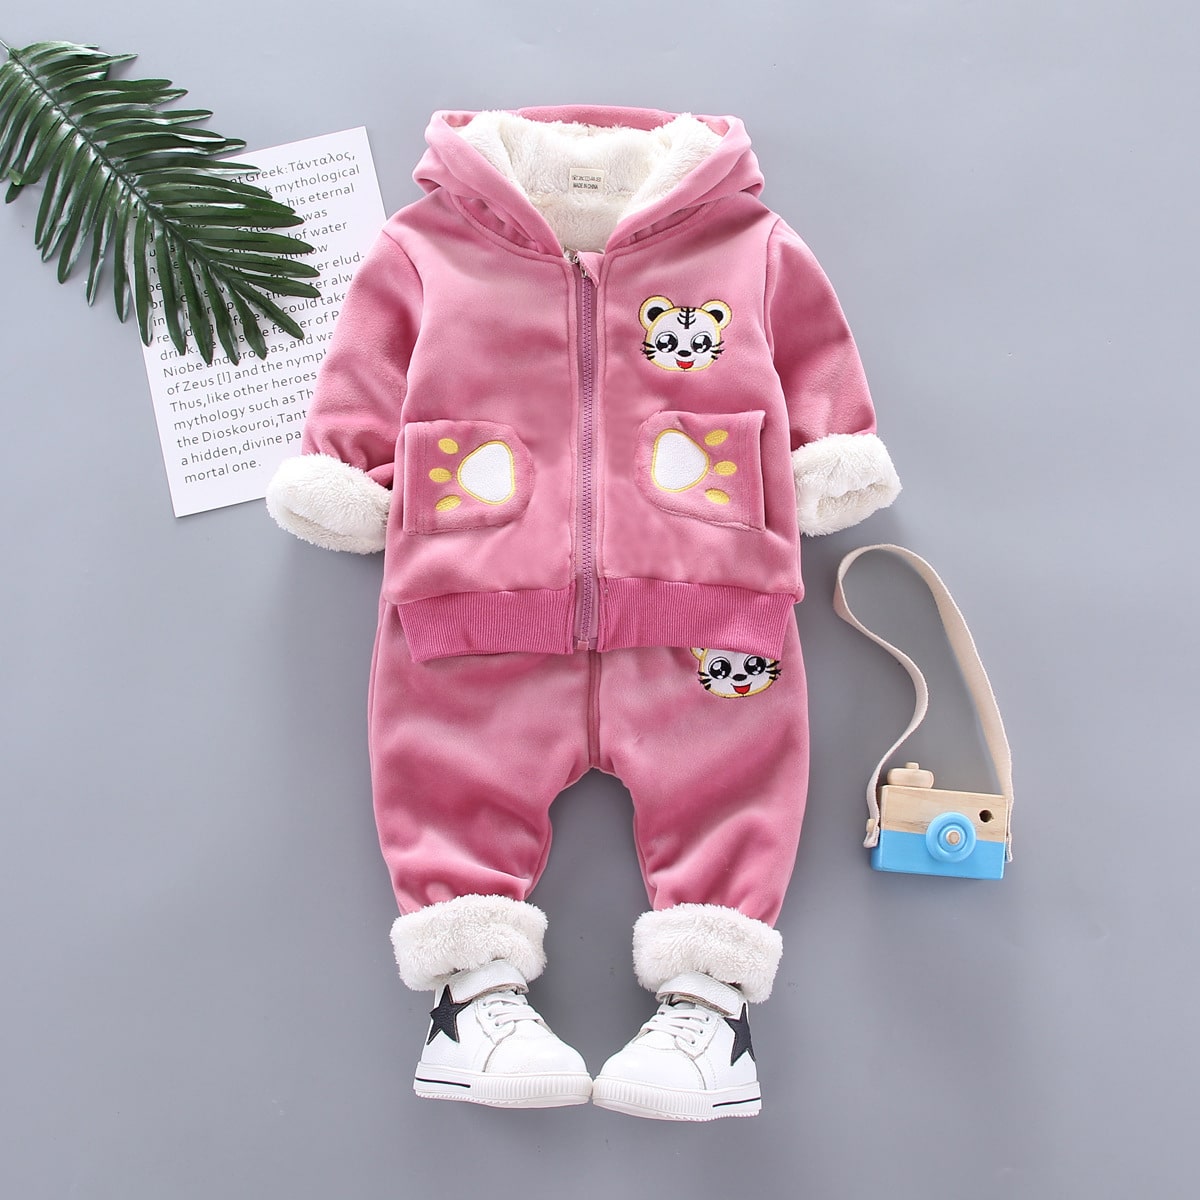 The New Children's clothing sports suit 7